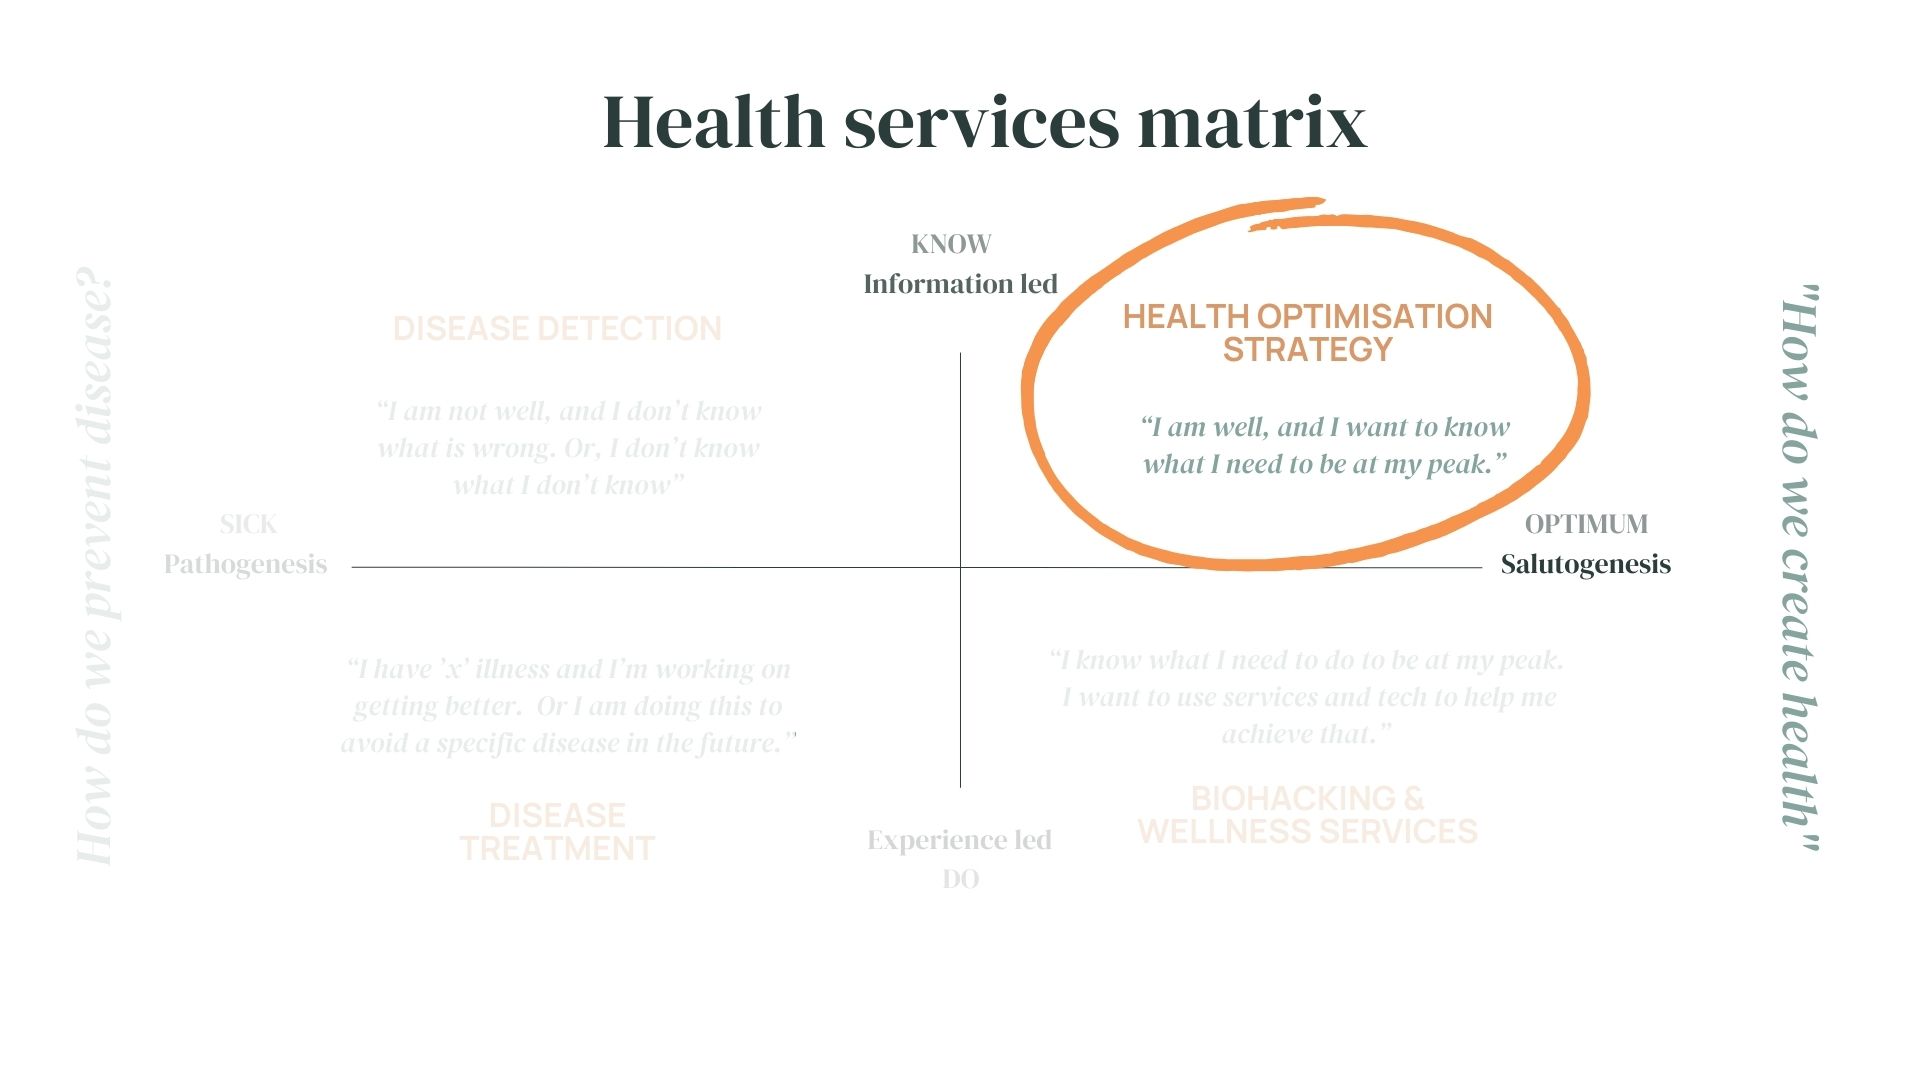 zoomed in section of health services matrix focusing on optimisation strategy